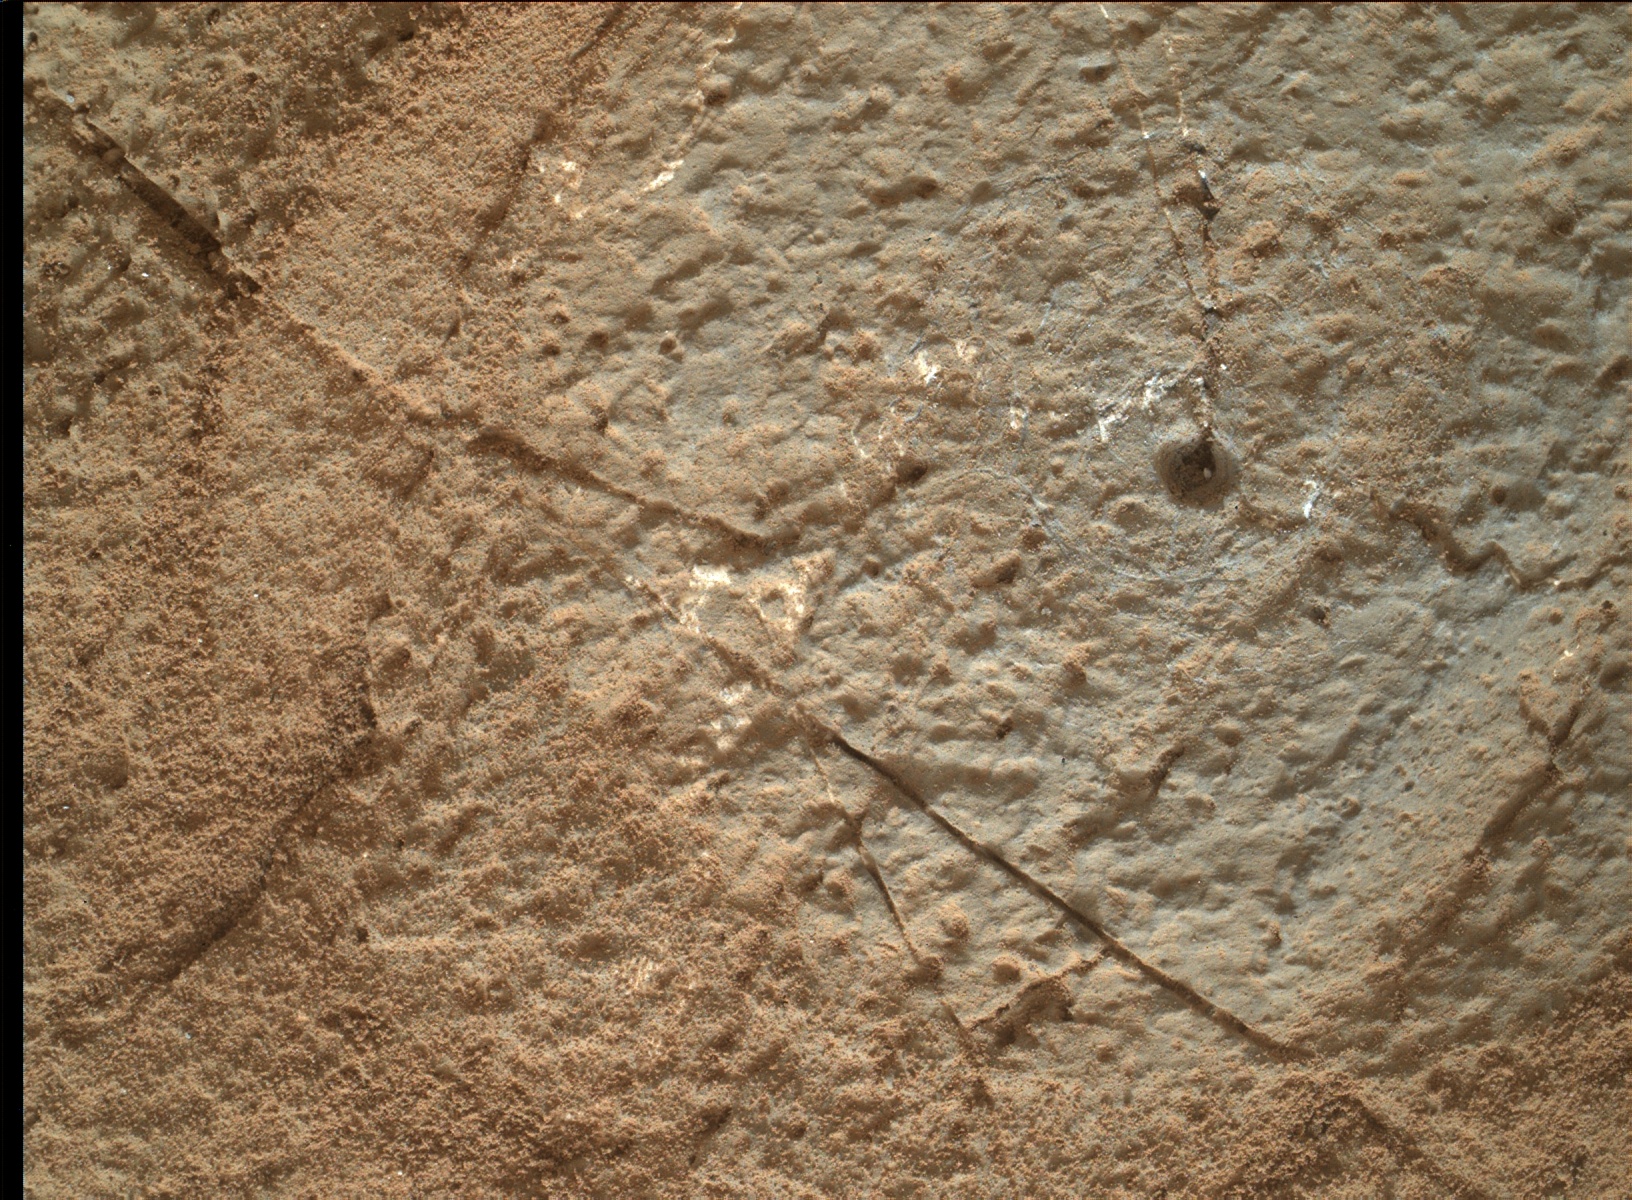 Nasa's Mars rover Curiosity acquired this image using its Mars Hand Lens Imager (MAHLI) on Sol 830